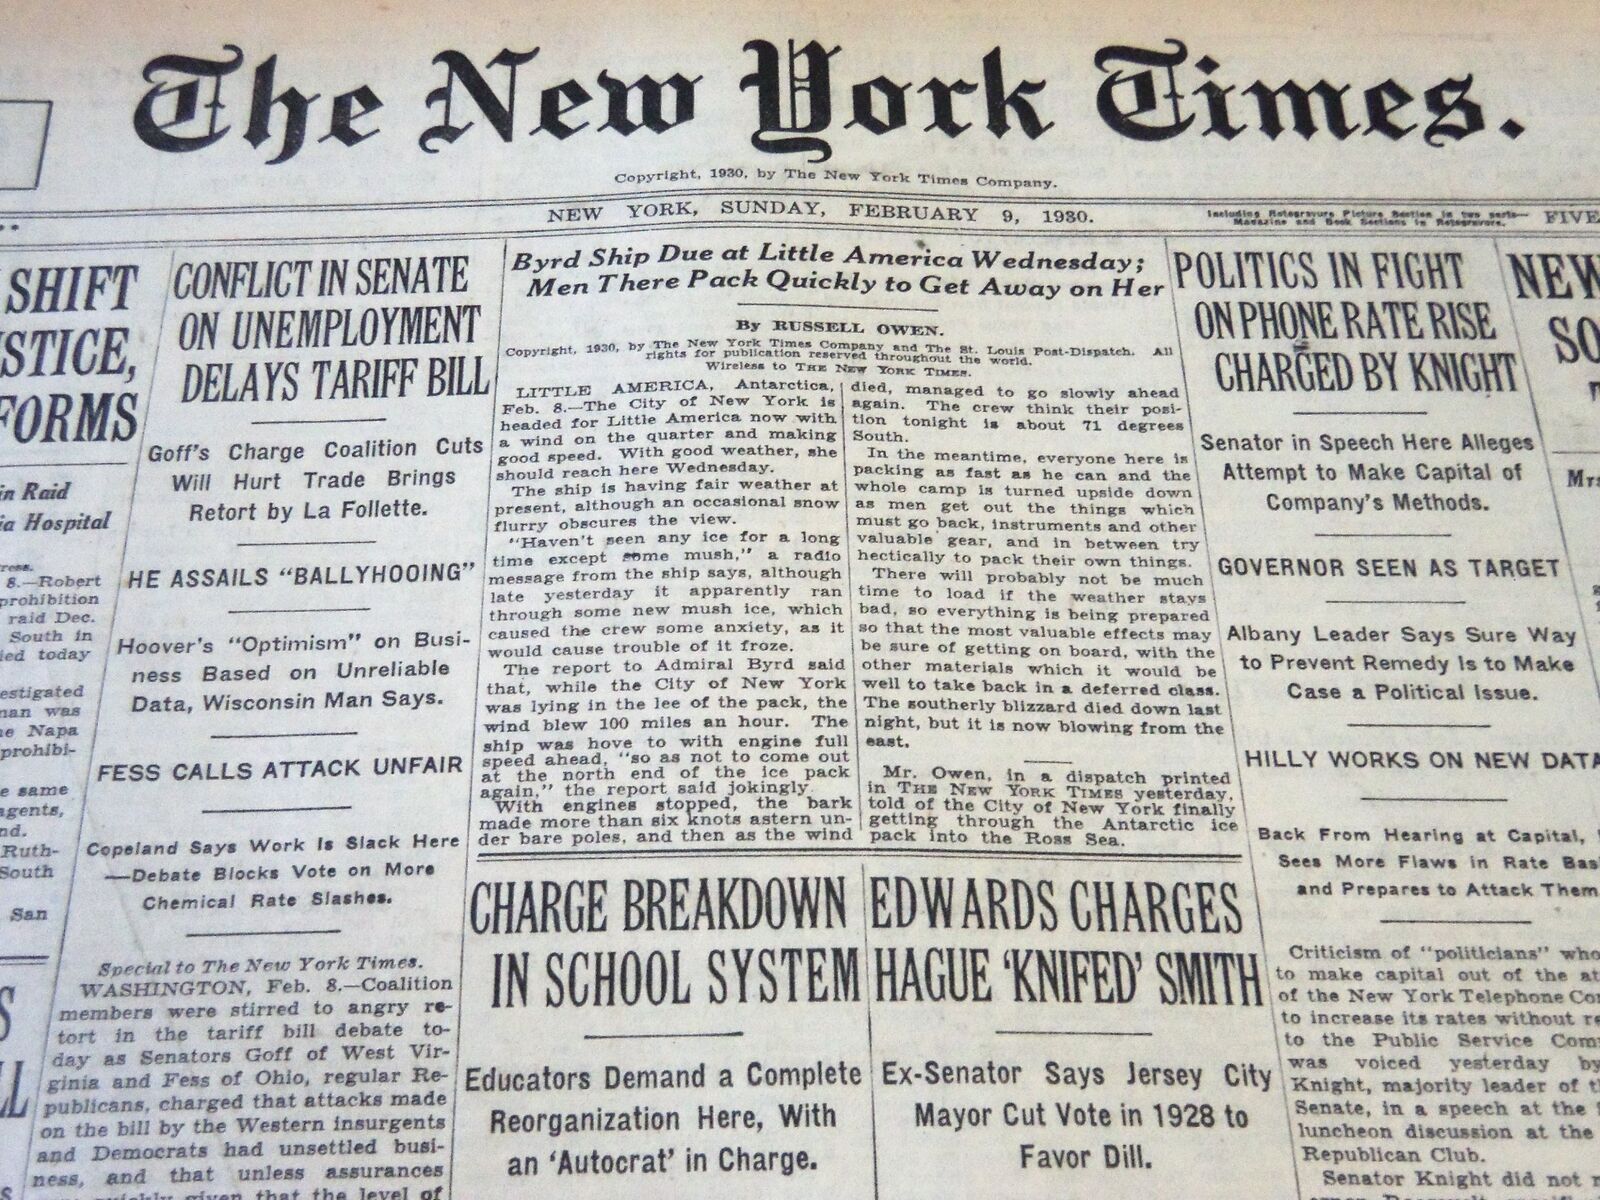 1930 FEBRUARY 9 NEW YORK TIMES - BYRD SHIP DUE AT LITTLE AMERICA WED - NT 5730